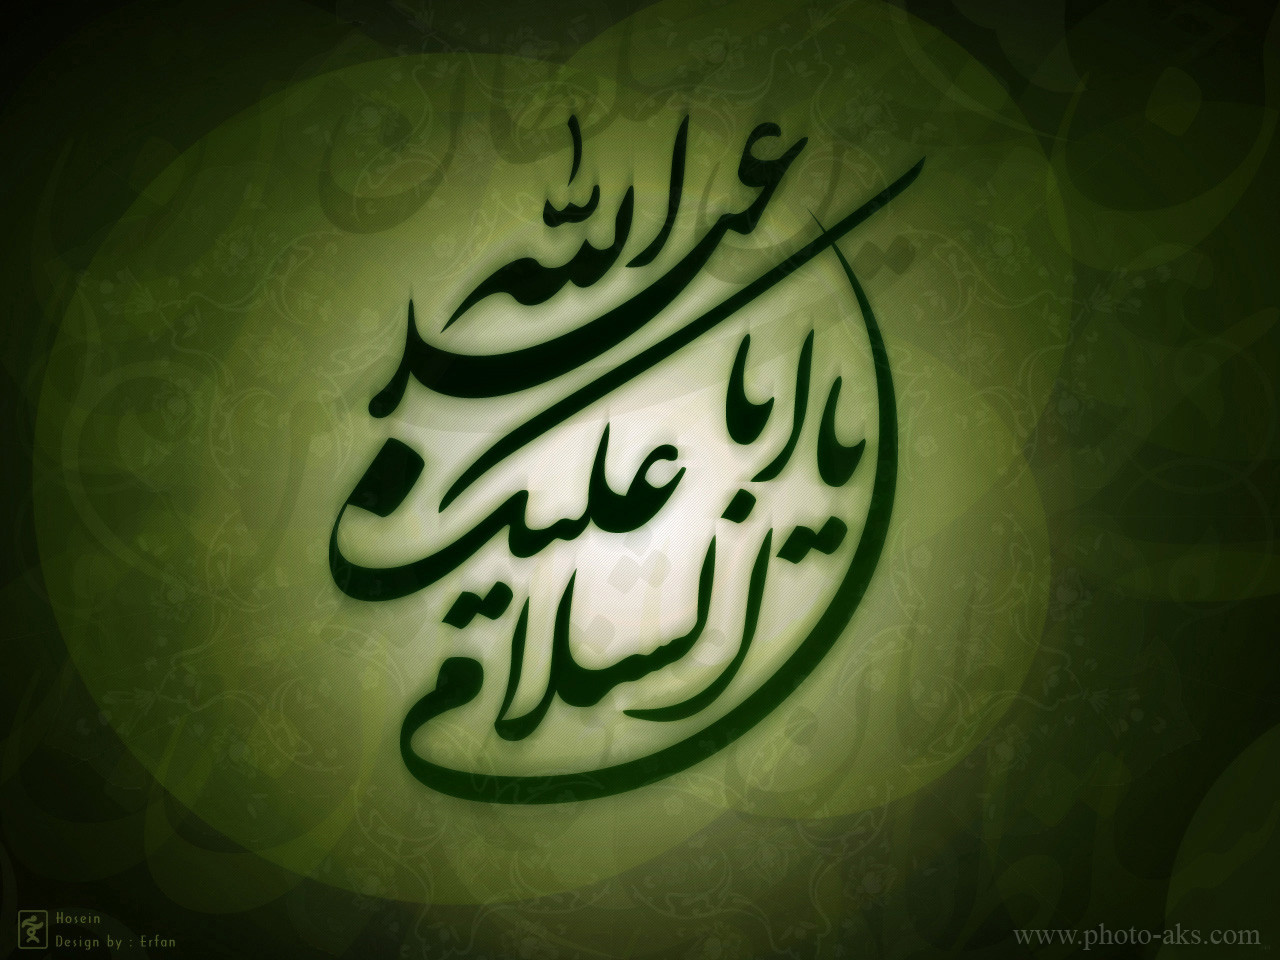 Peace be upon Hussein - Wallpaper